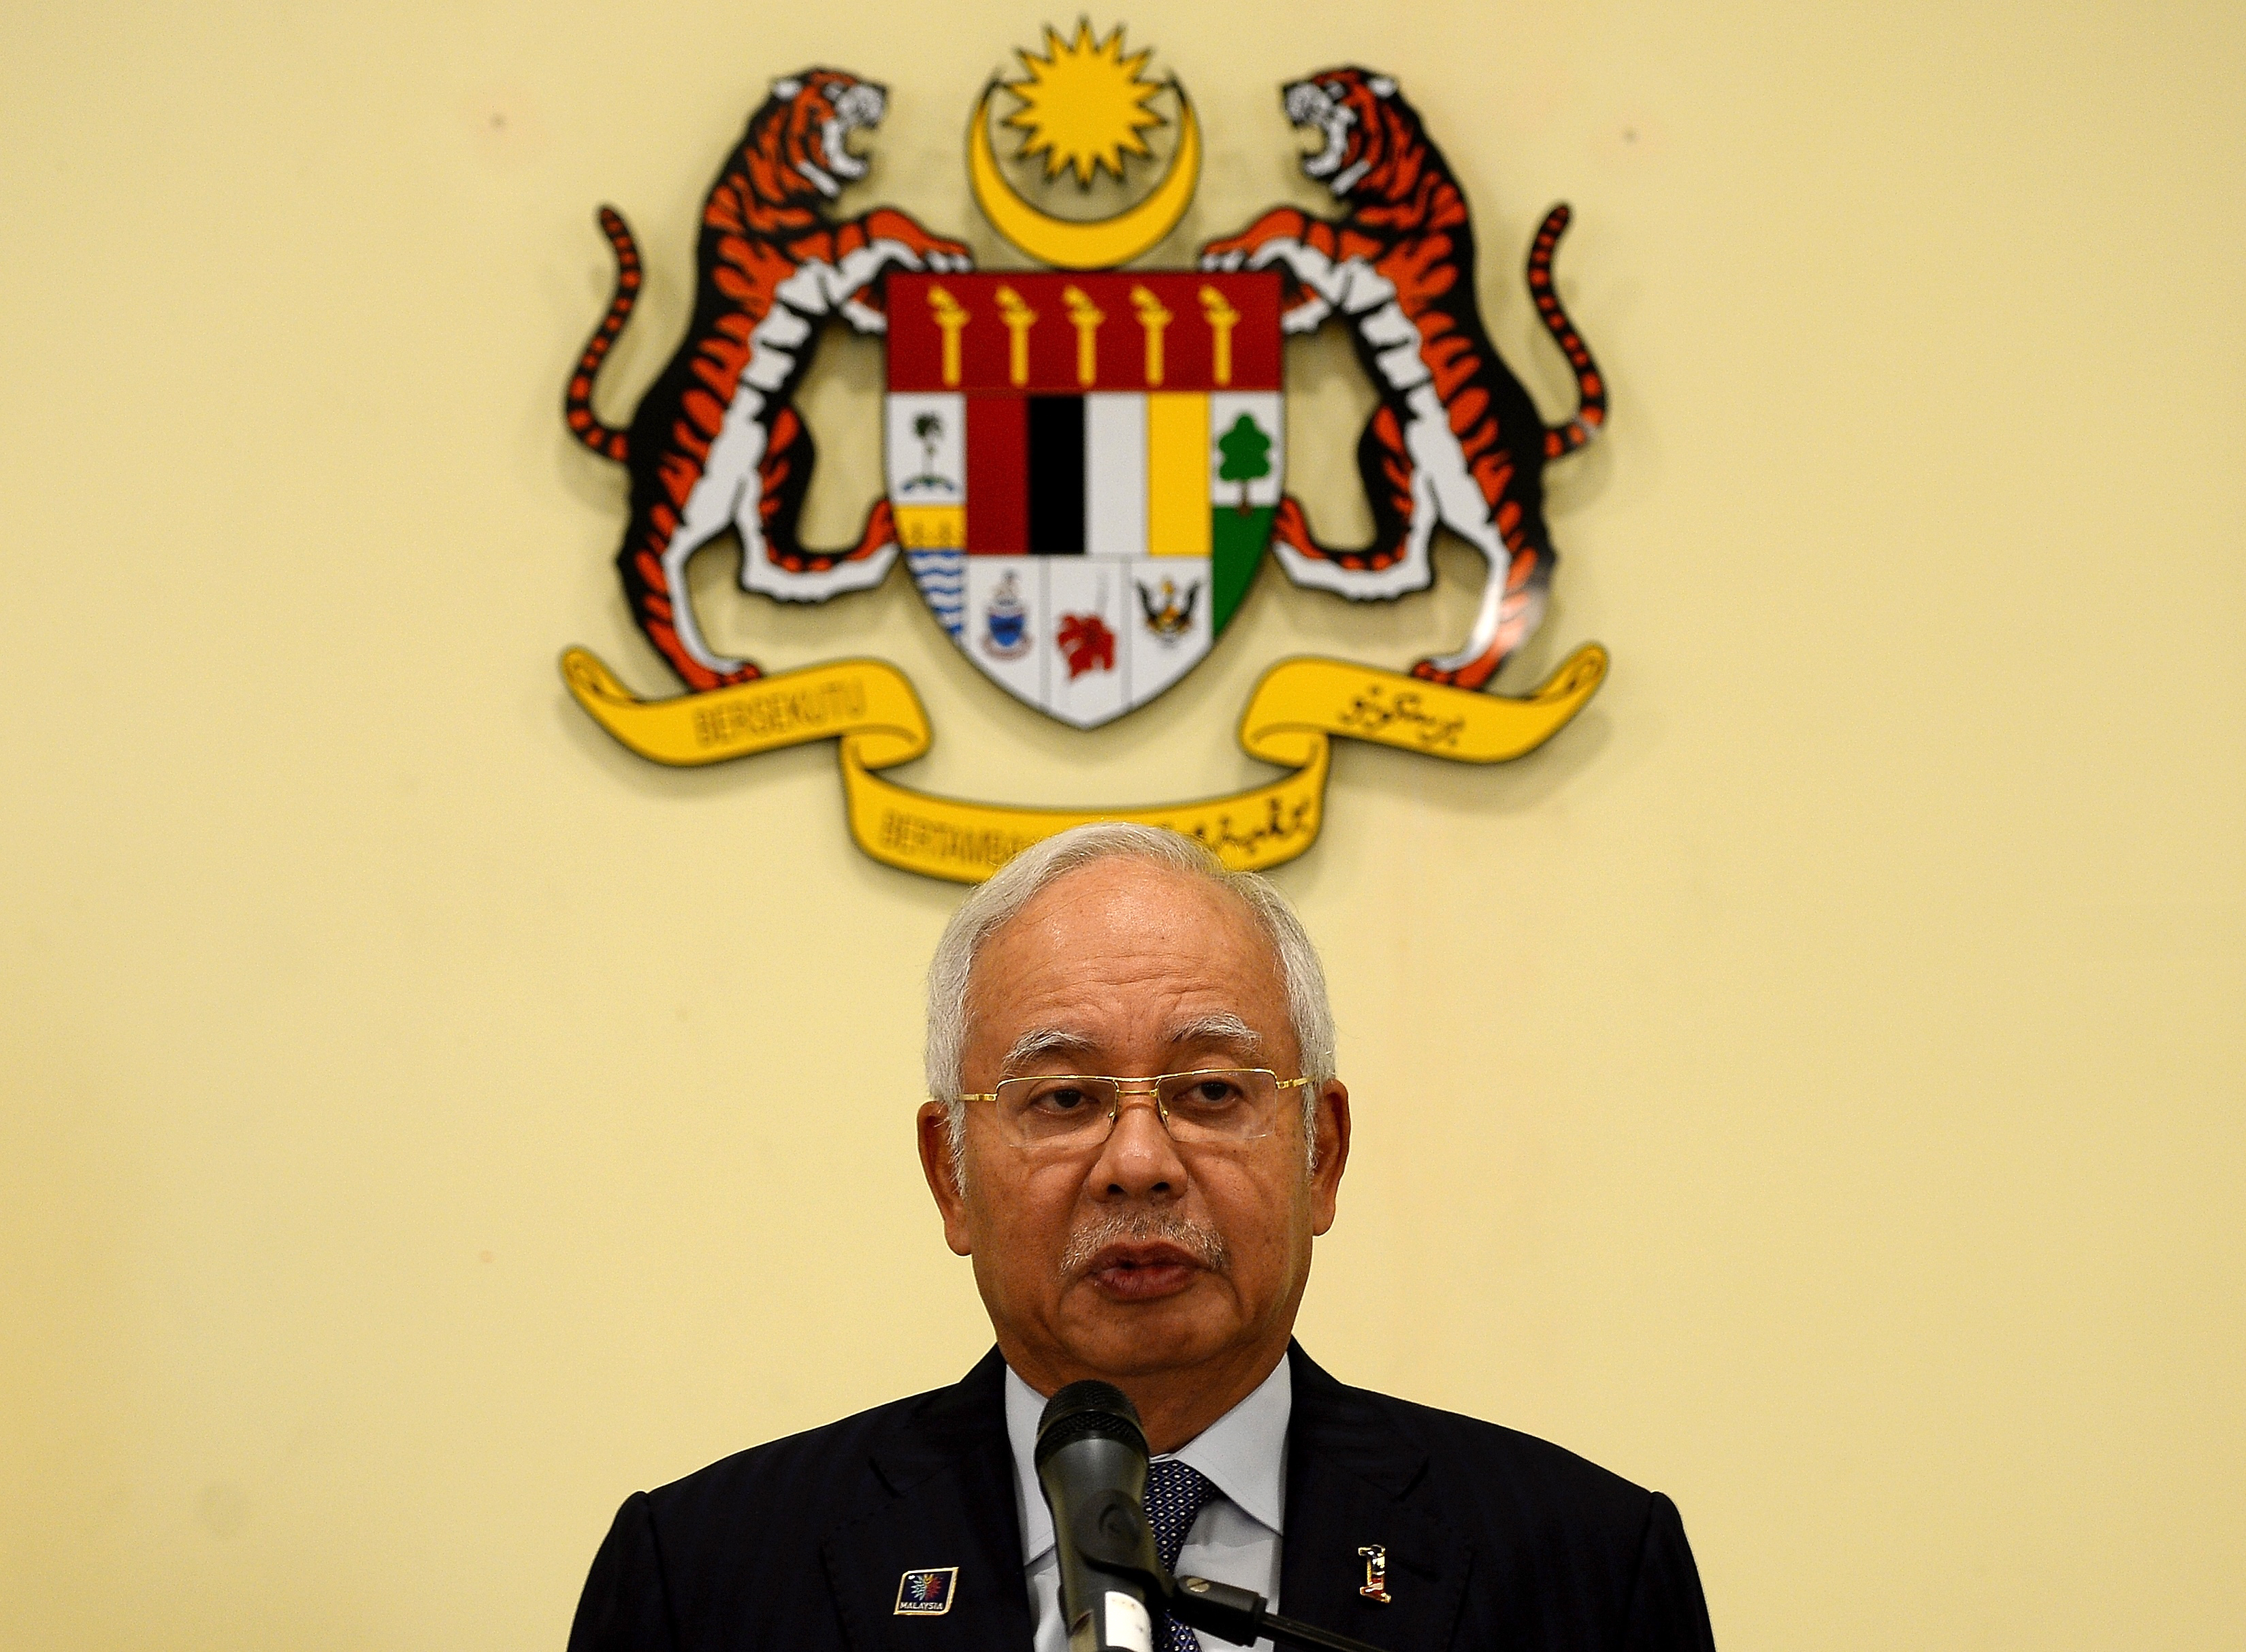 Malaysia's Prime Minister Najib Razak addresses the media following a cabinet reshuffle at his office in Putrajaya on June 27, 2016.  Scandal-hit Malaysian Prime Minister Najib Razak Monday announced a cabinet reshuffle, including promoting a trusted ally to manage the economy, in what analysts said could be preparation for a snap election. / AFP PHOTO / MANAN VATSYAYANA